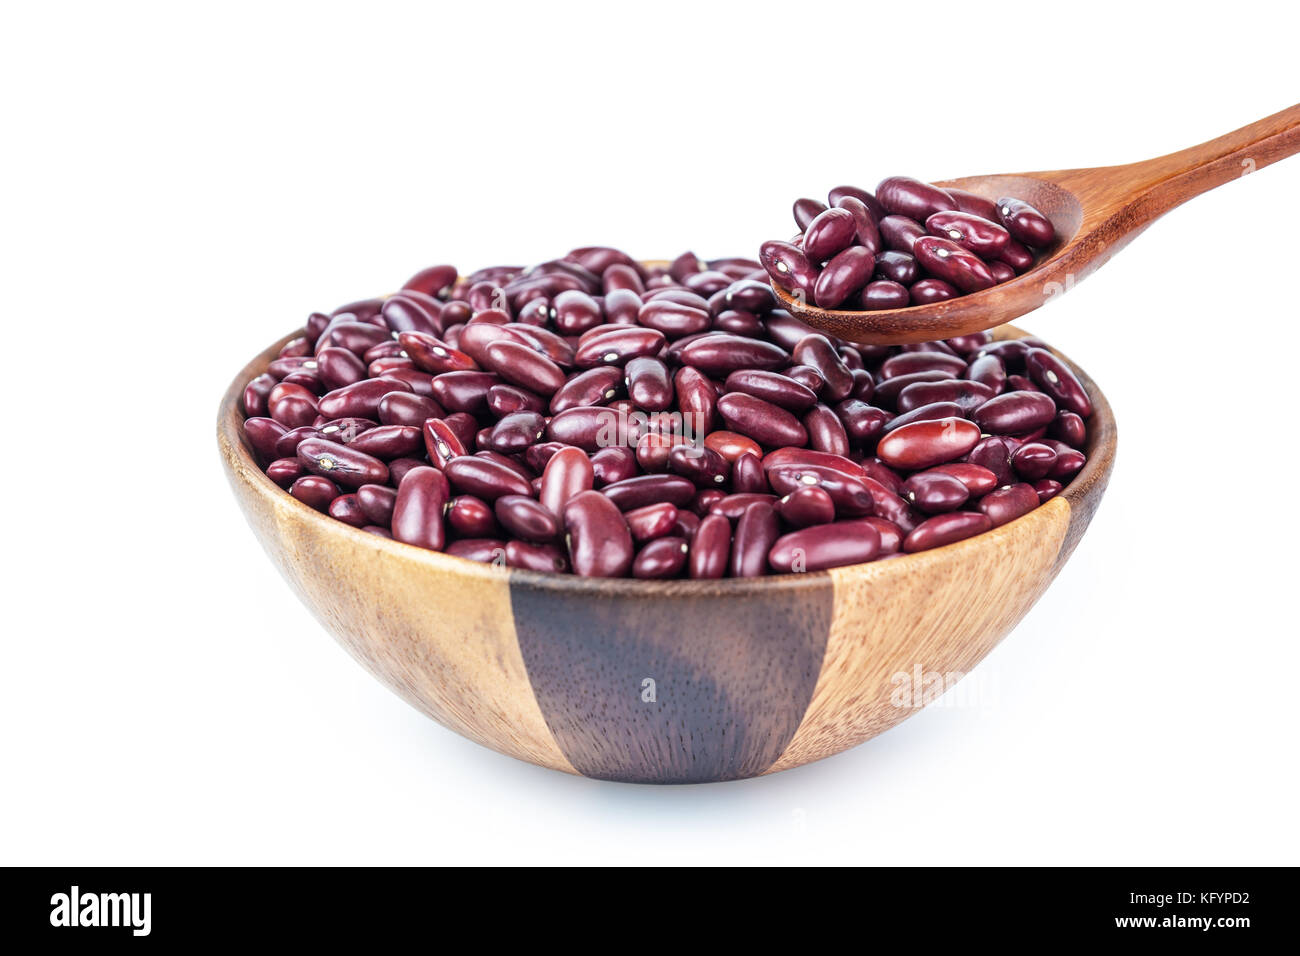 A photo of red beans ina wood bowl on isolate white background Stock Photo